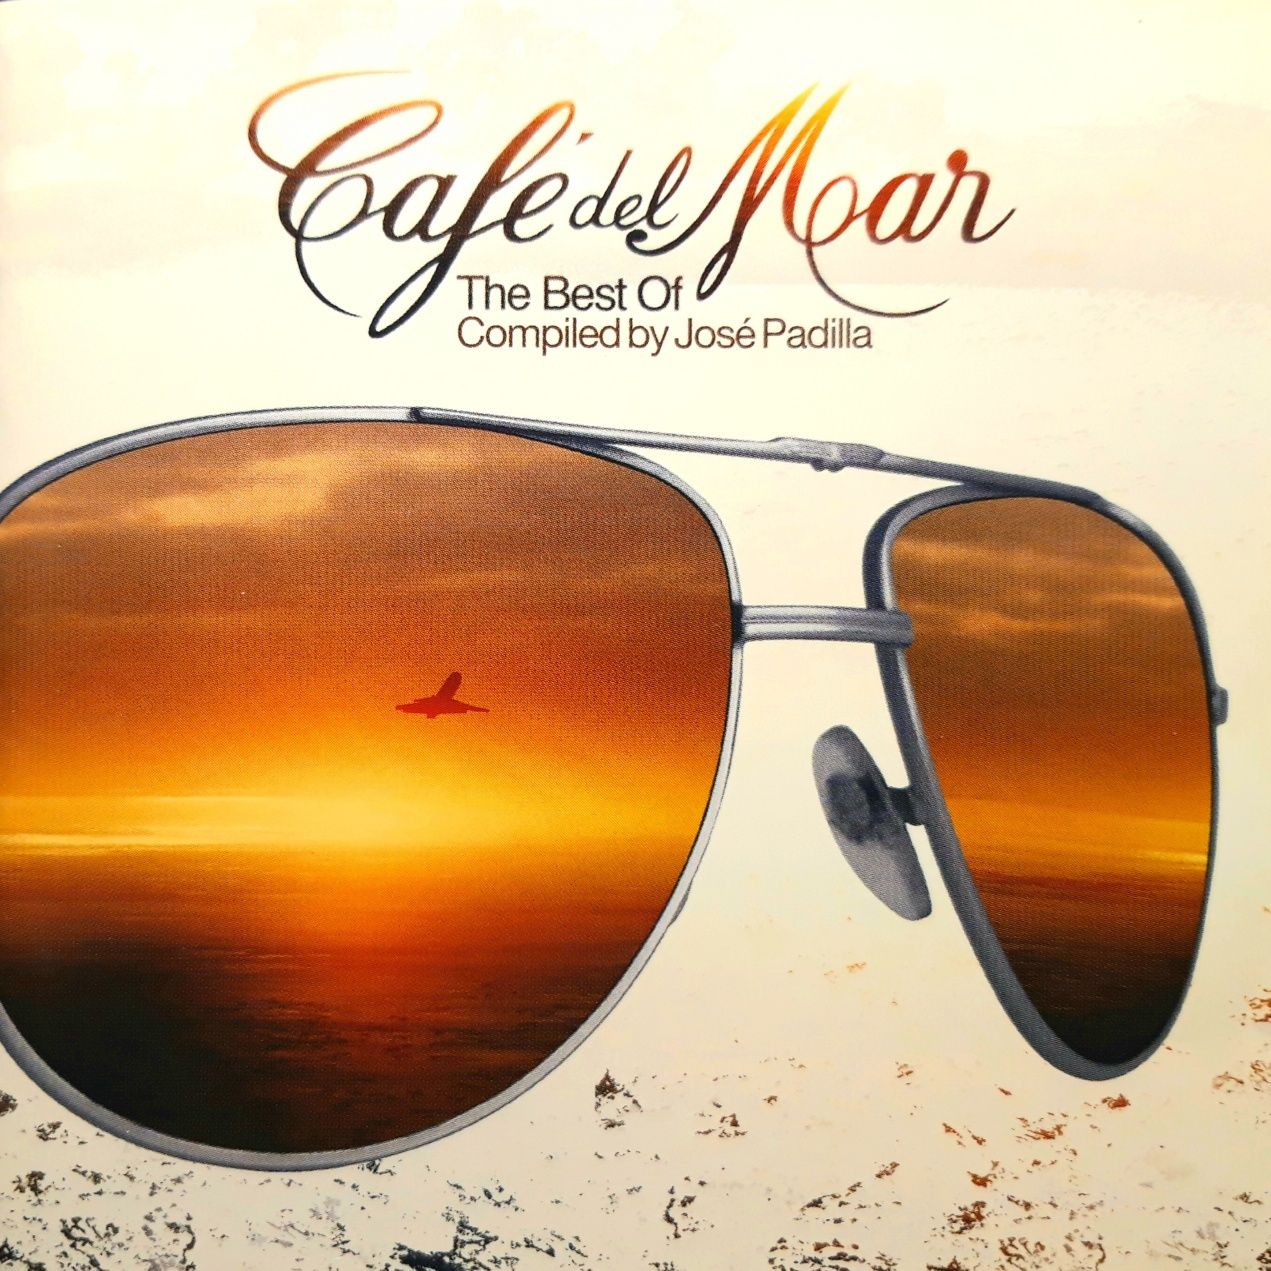 Jose Padilla – Cafe Del Mar (The Best Of) 2xCD, 2004